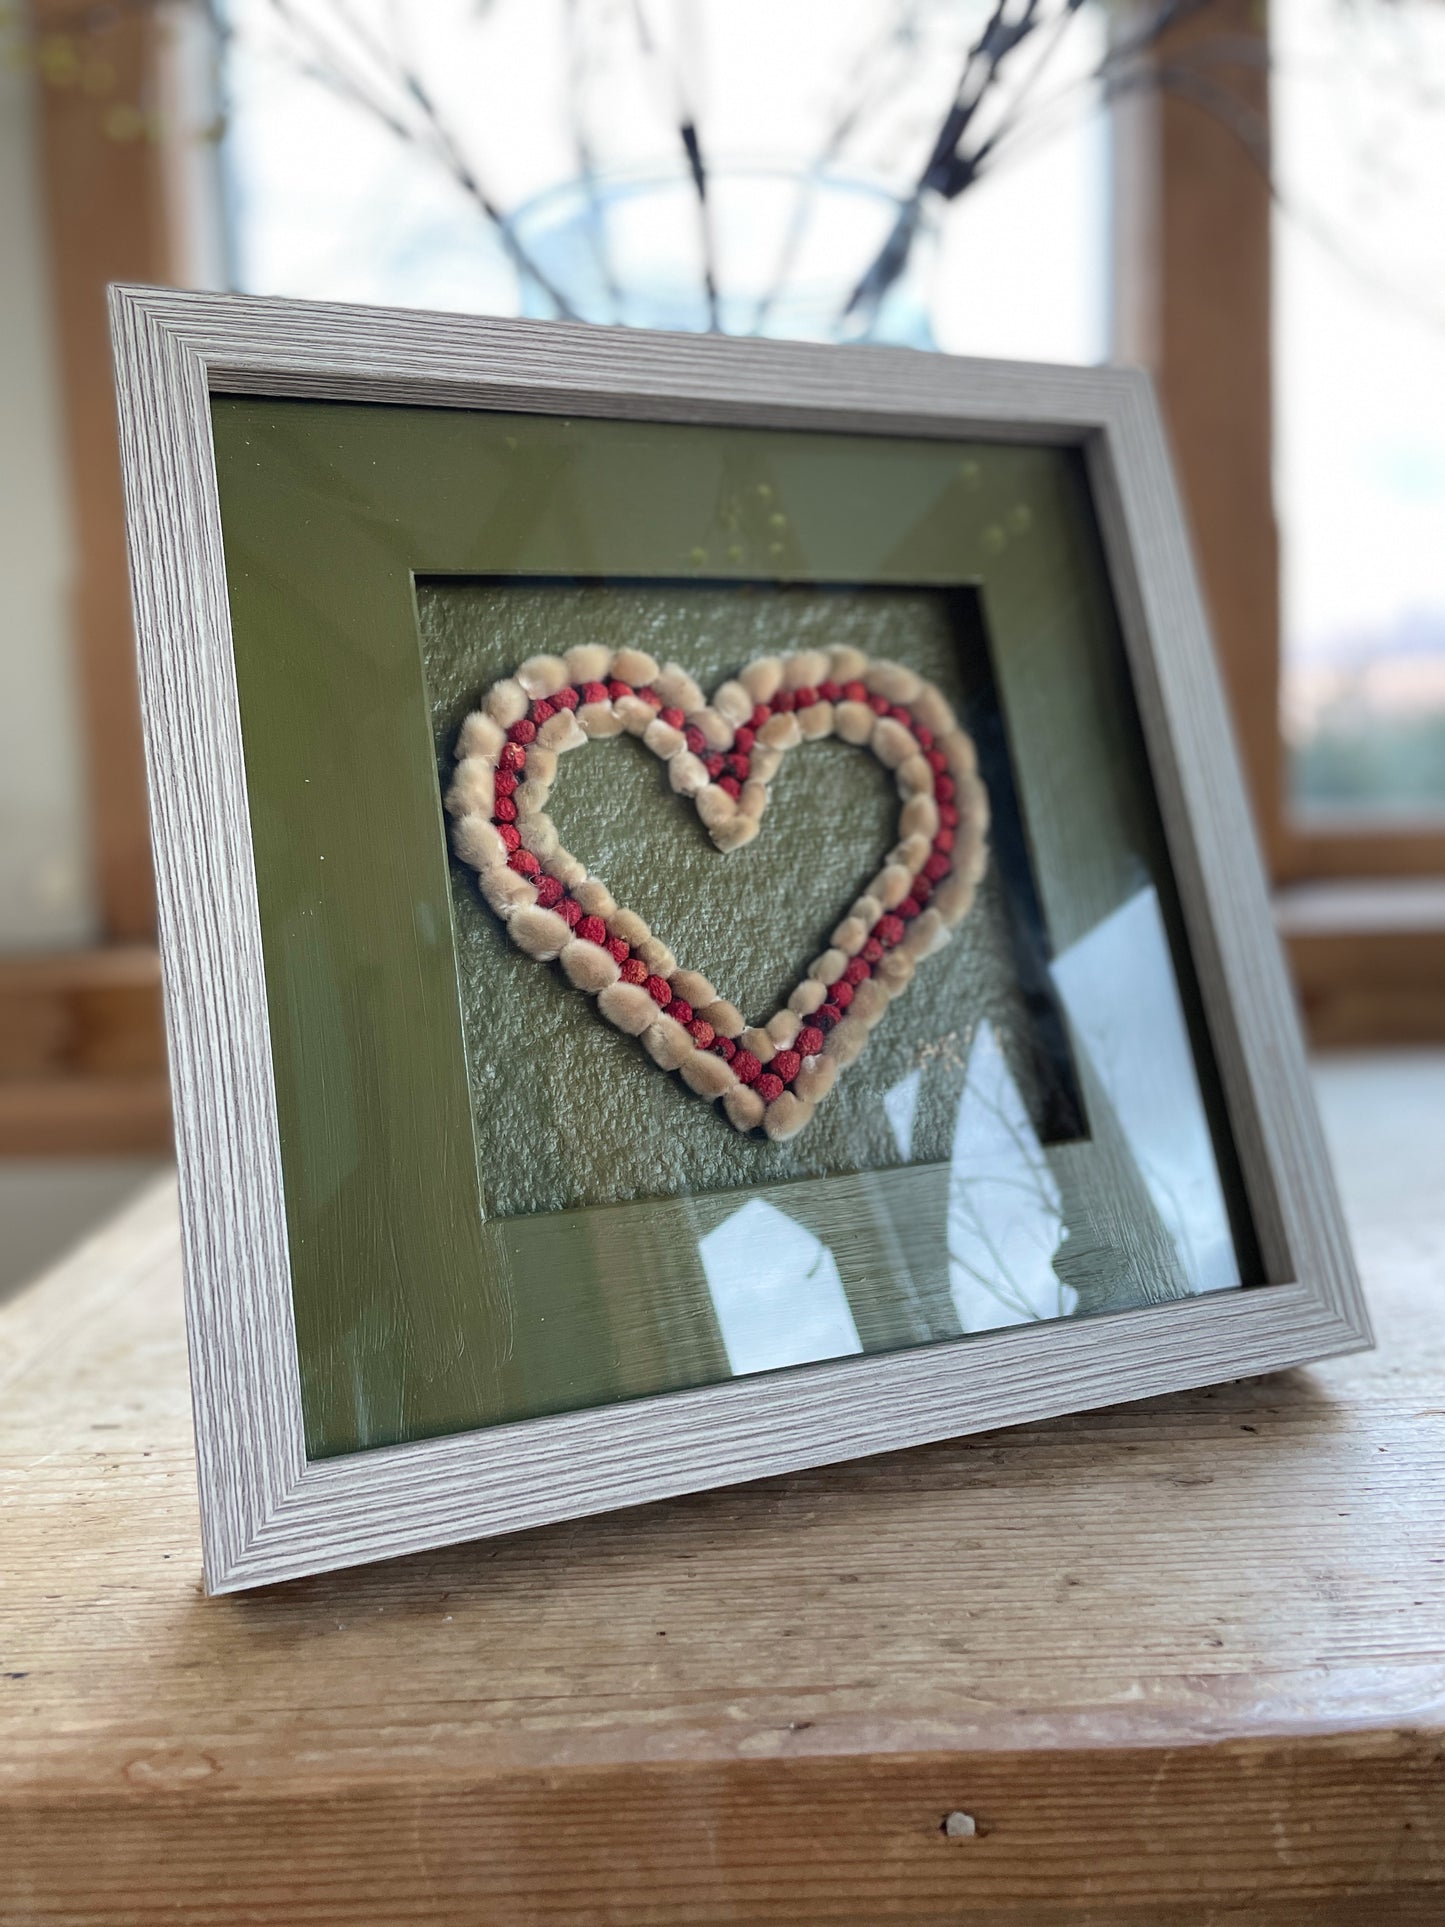 Olive green box frame with red berries